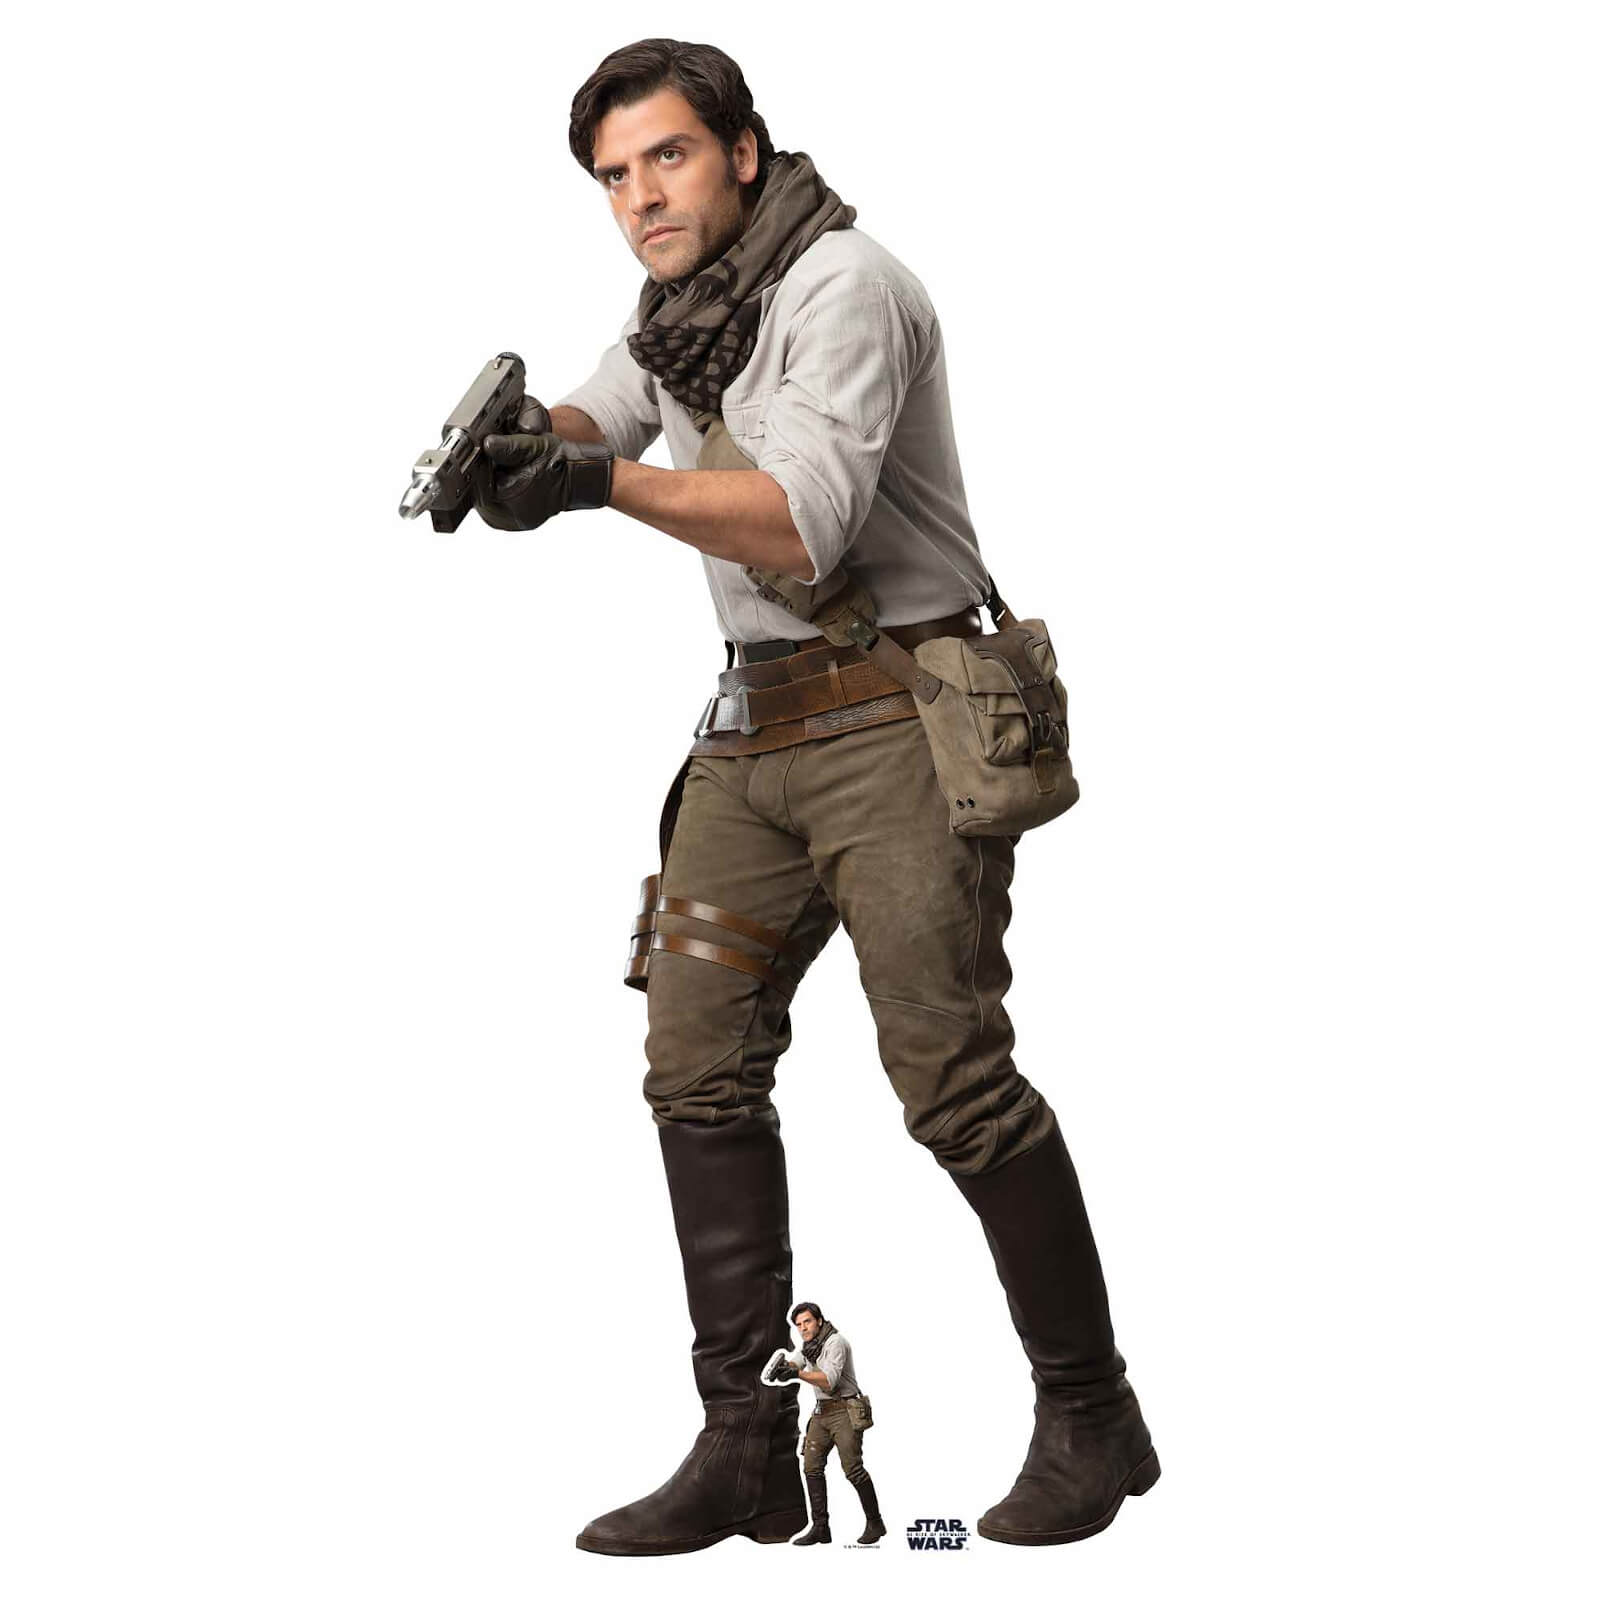 Star Wars (The Rise of Skywalker) Poe Lifesized Cardboard Cut Out